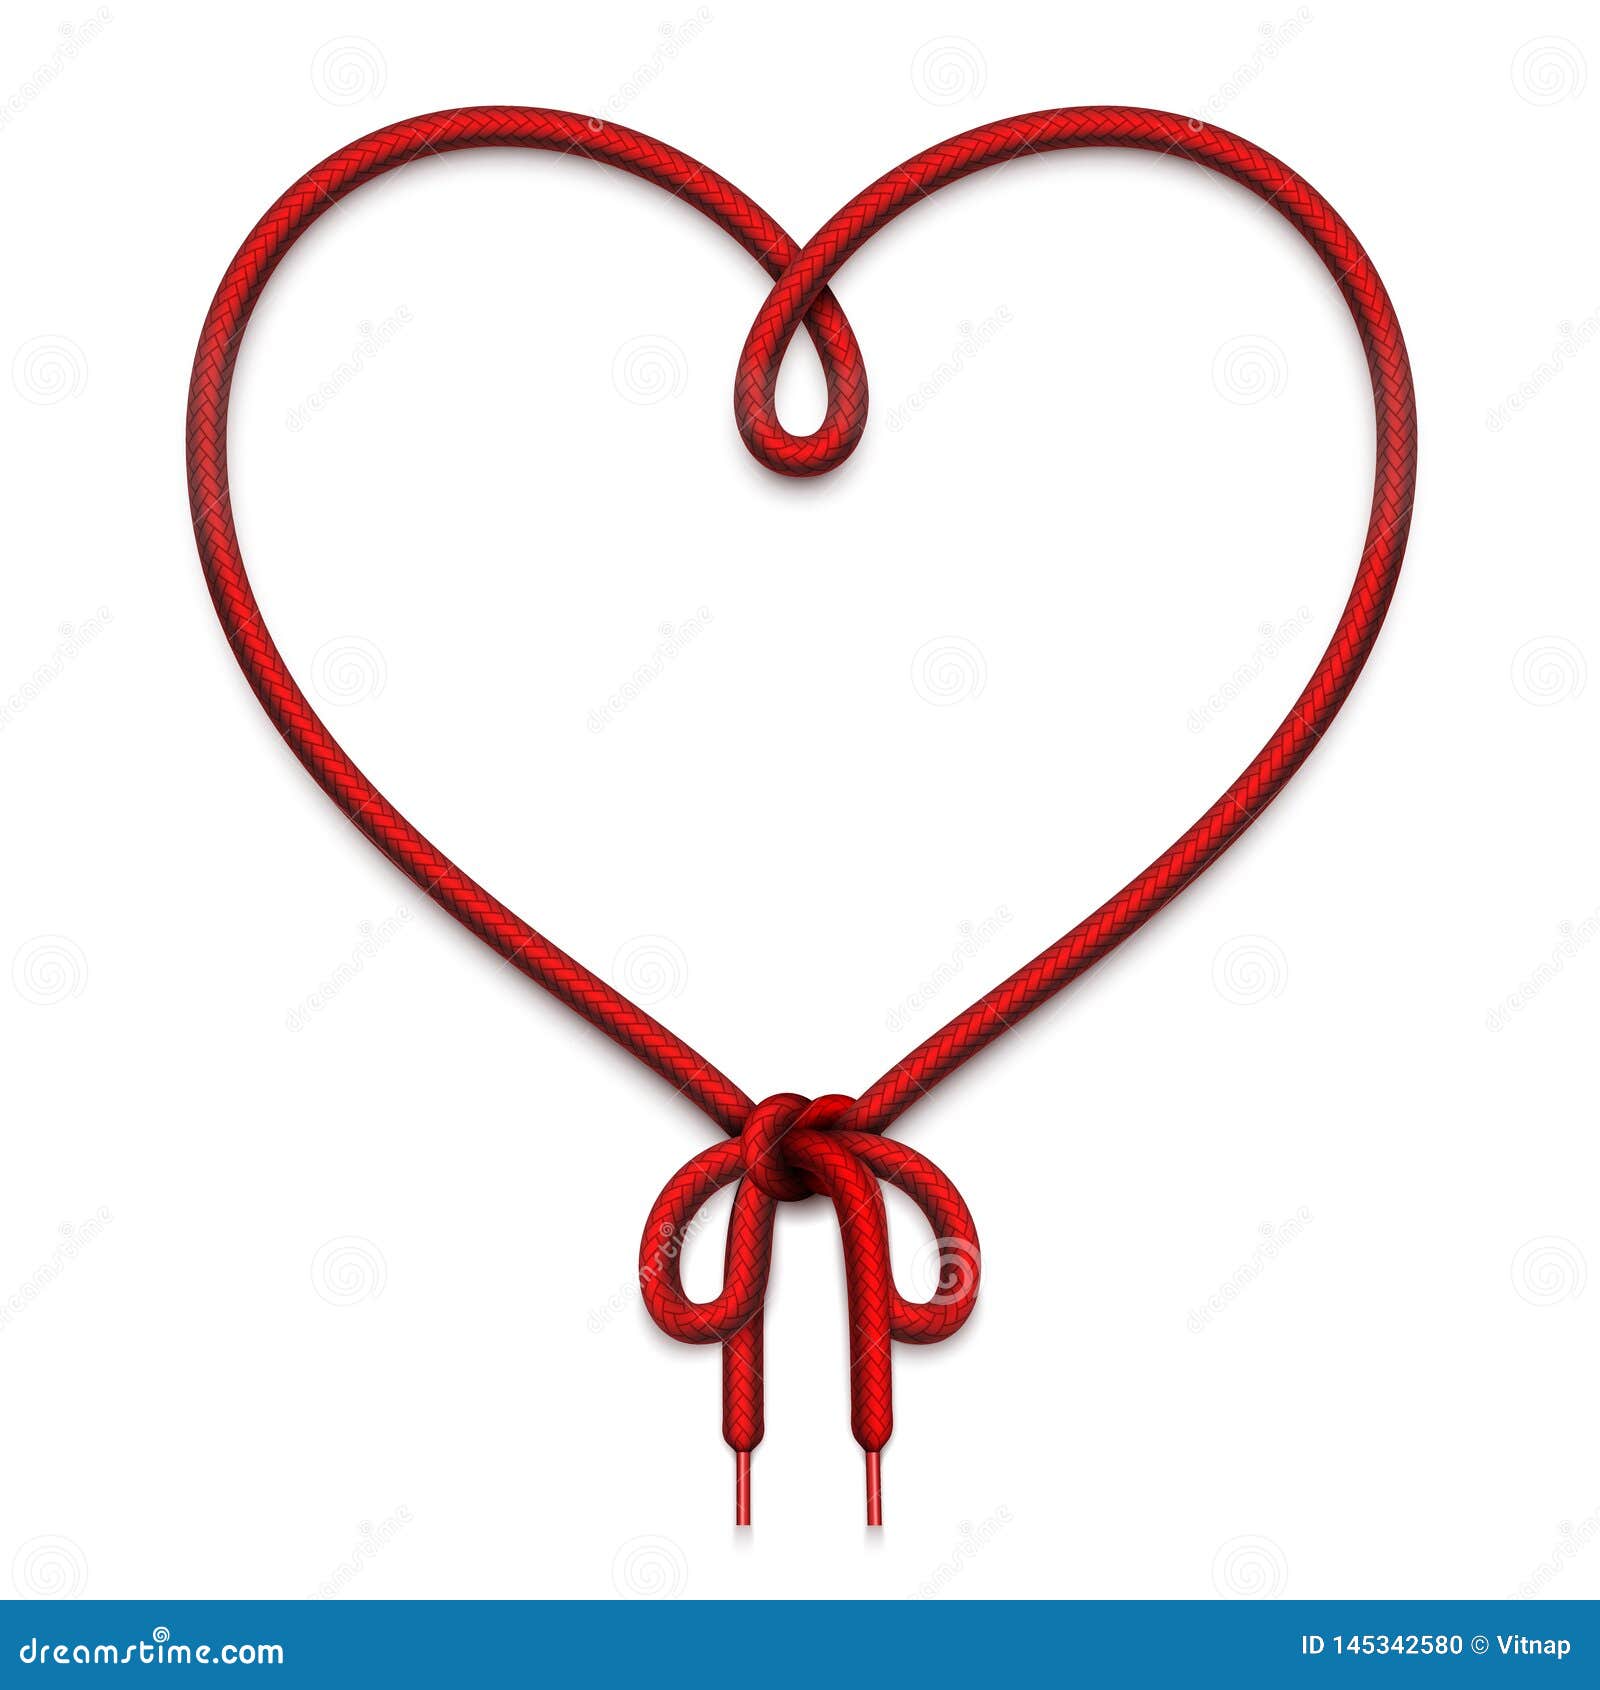 heart frame made of loop of lacing with bowknot.  template 